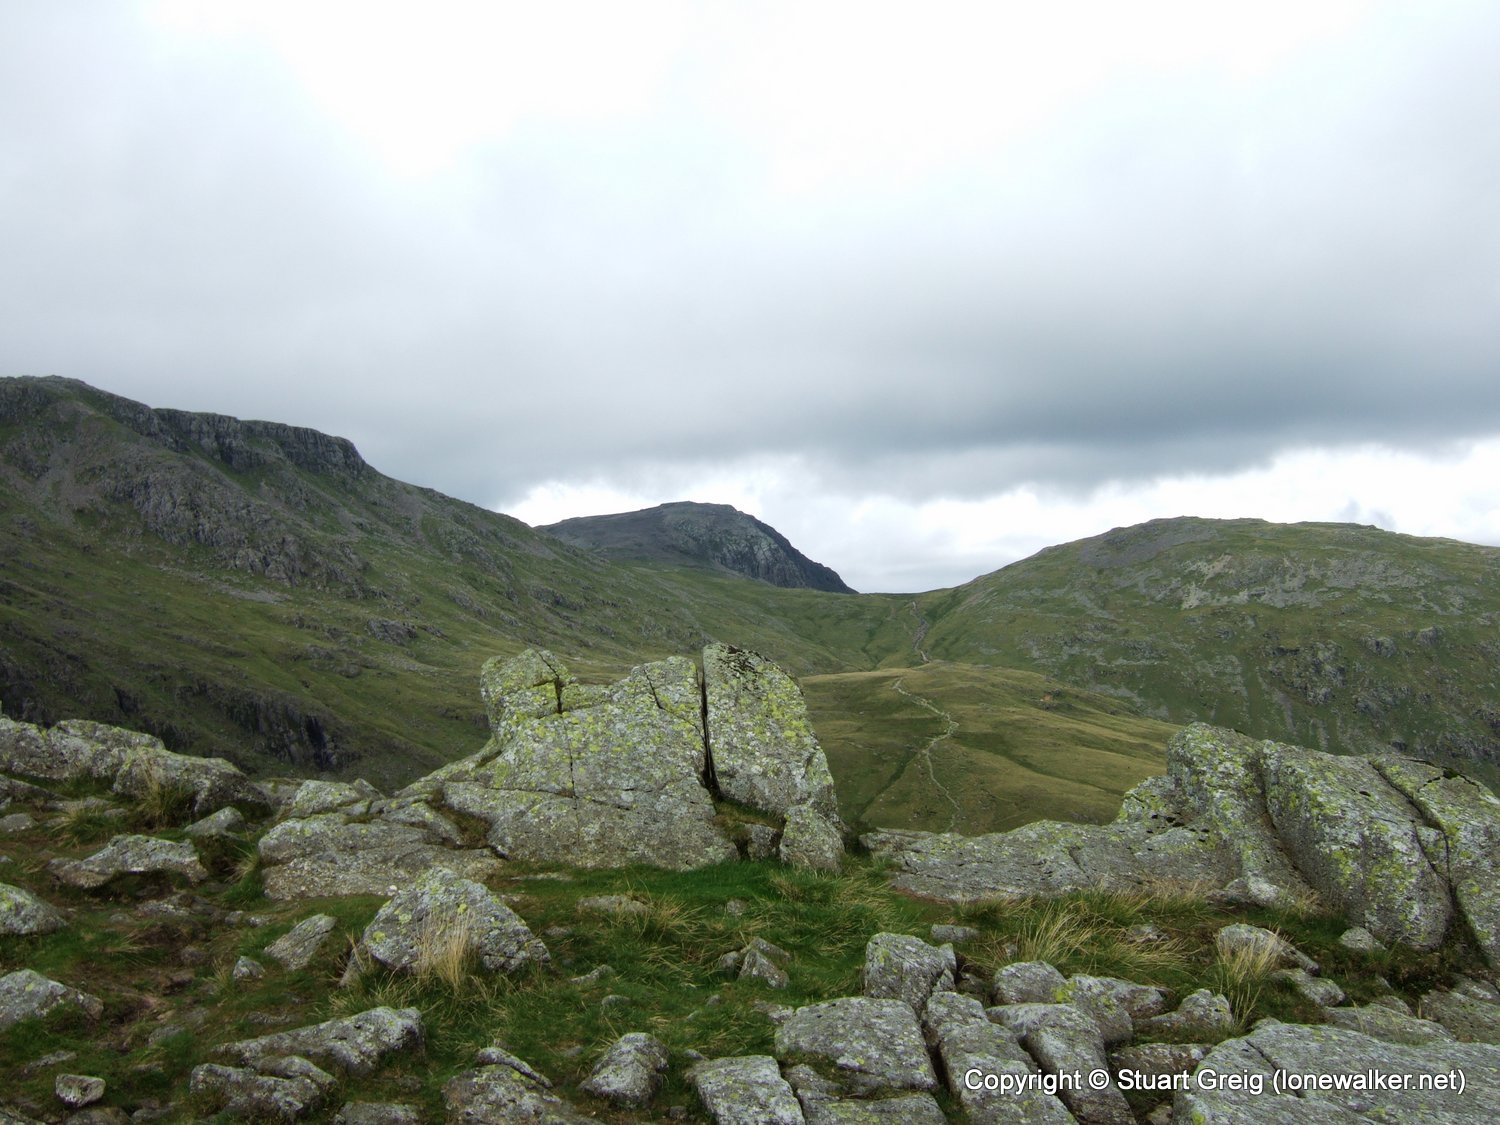 Esk Pike and Bow Fell